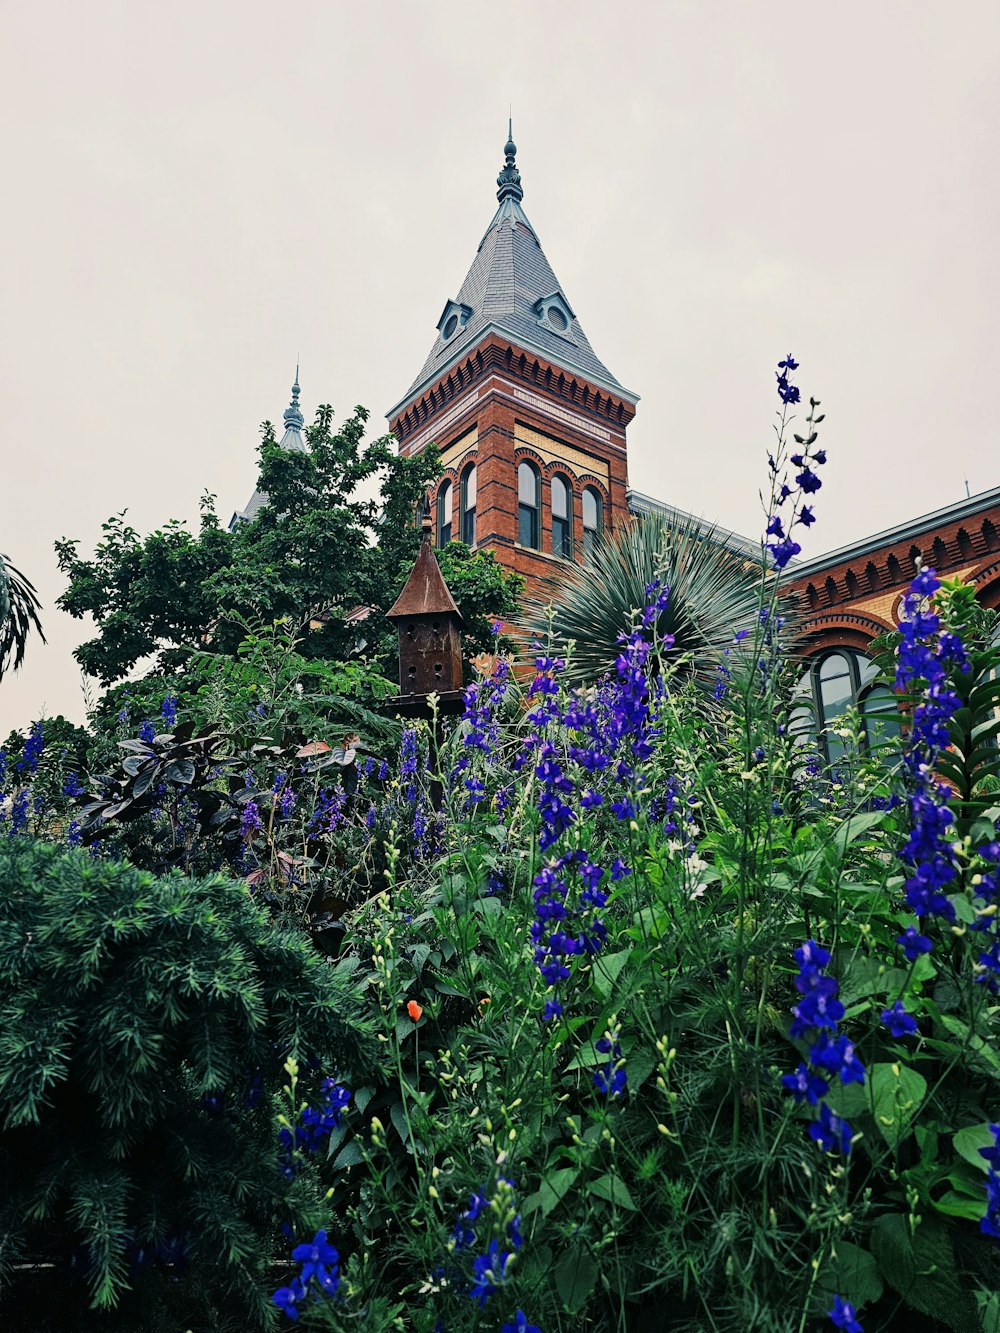 a building with a tower surrounded by blue flowers